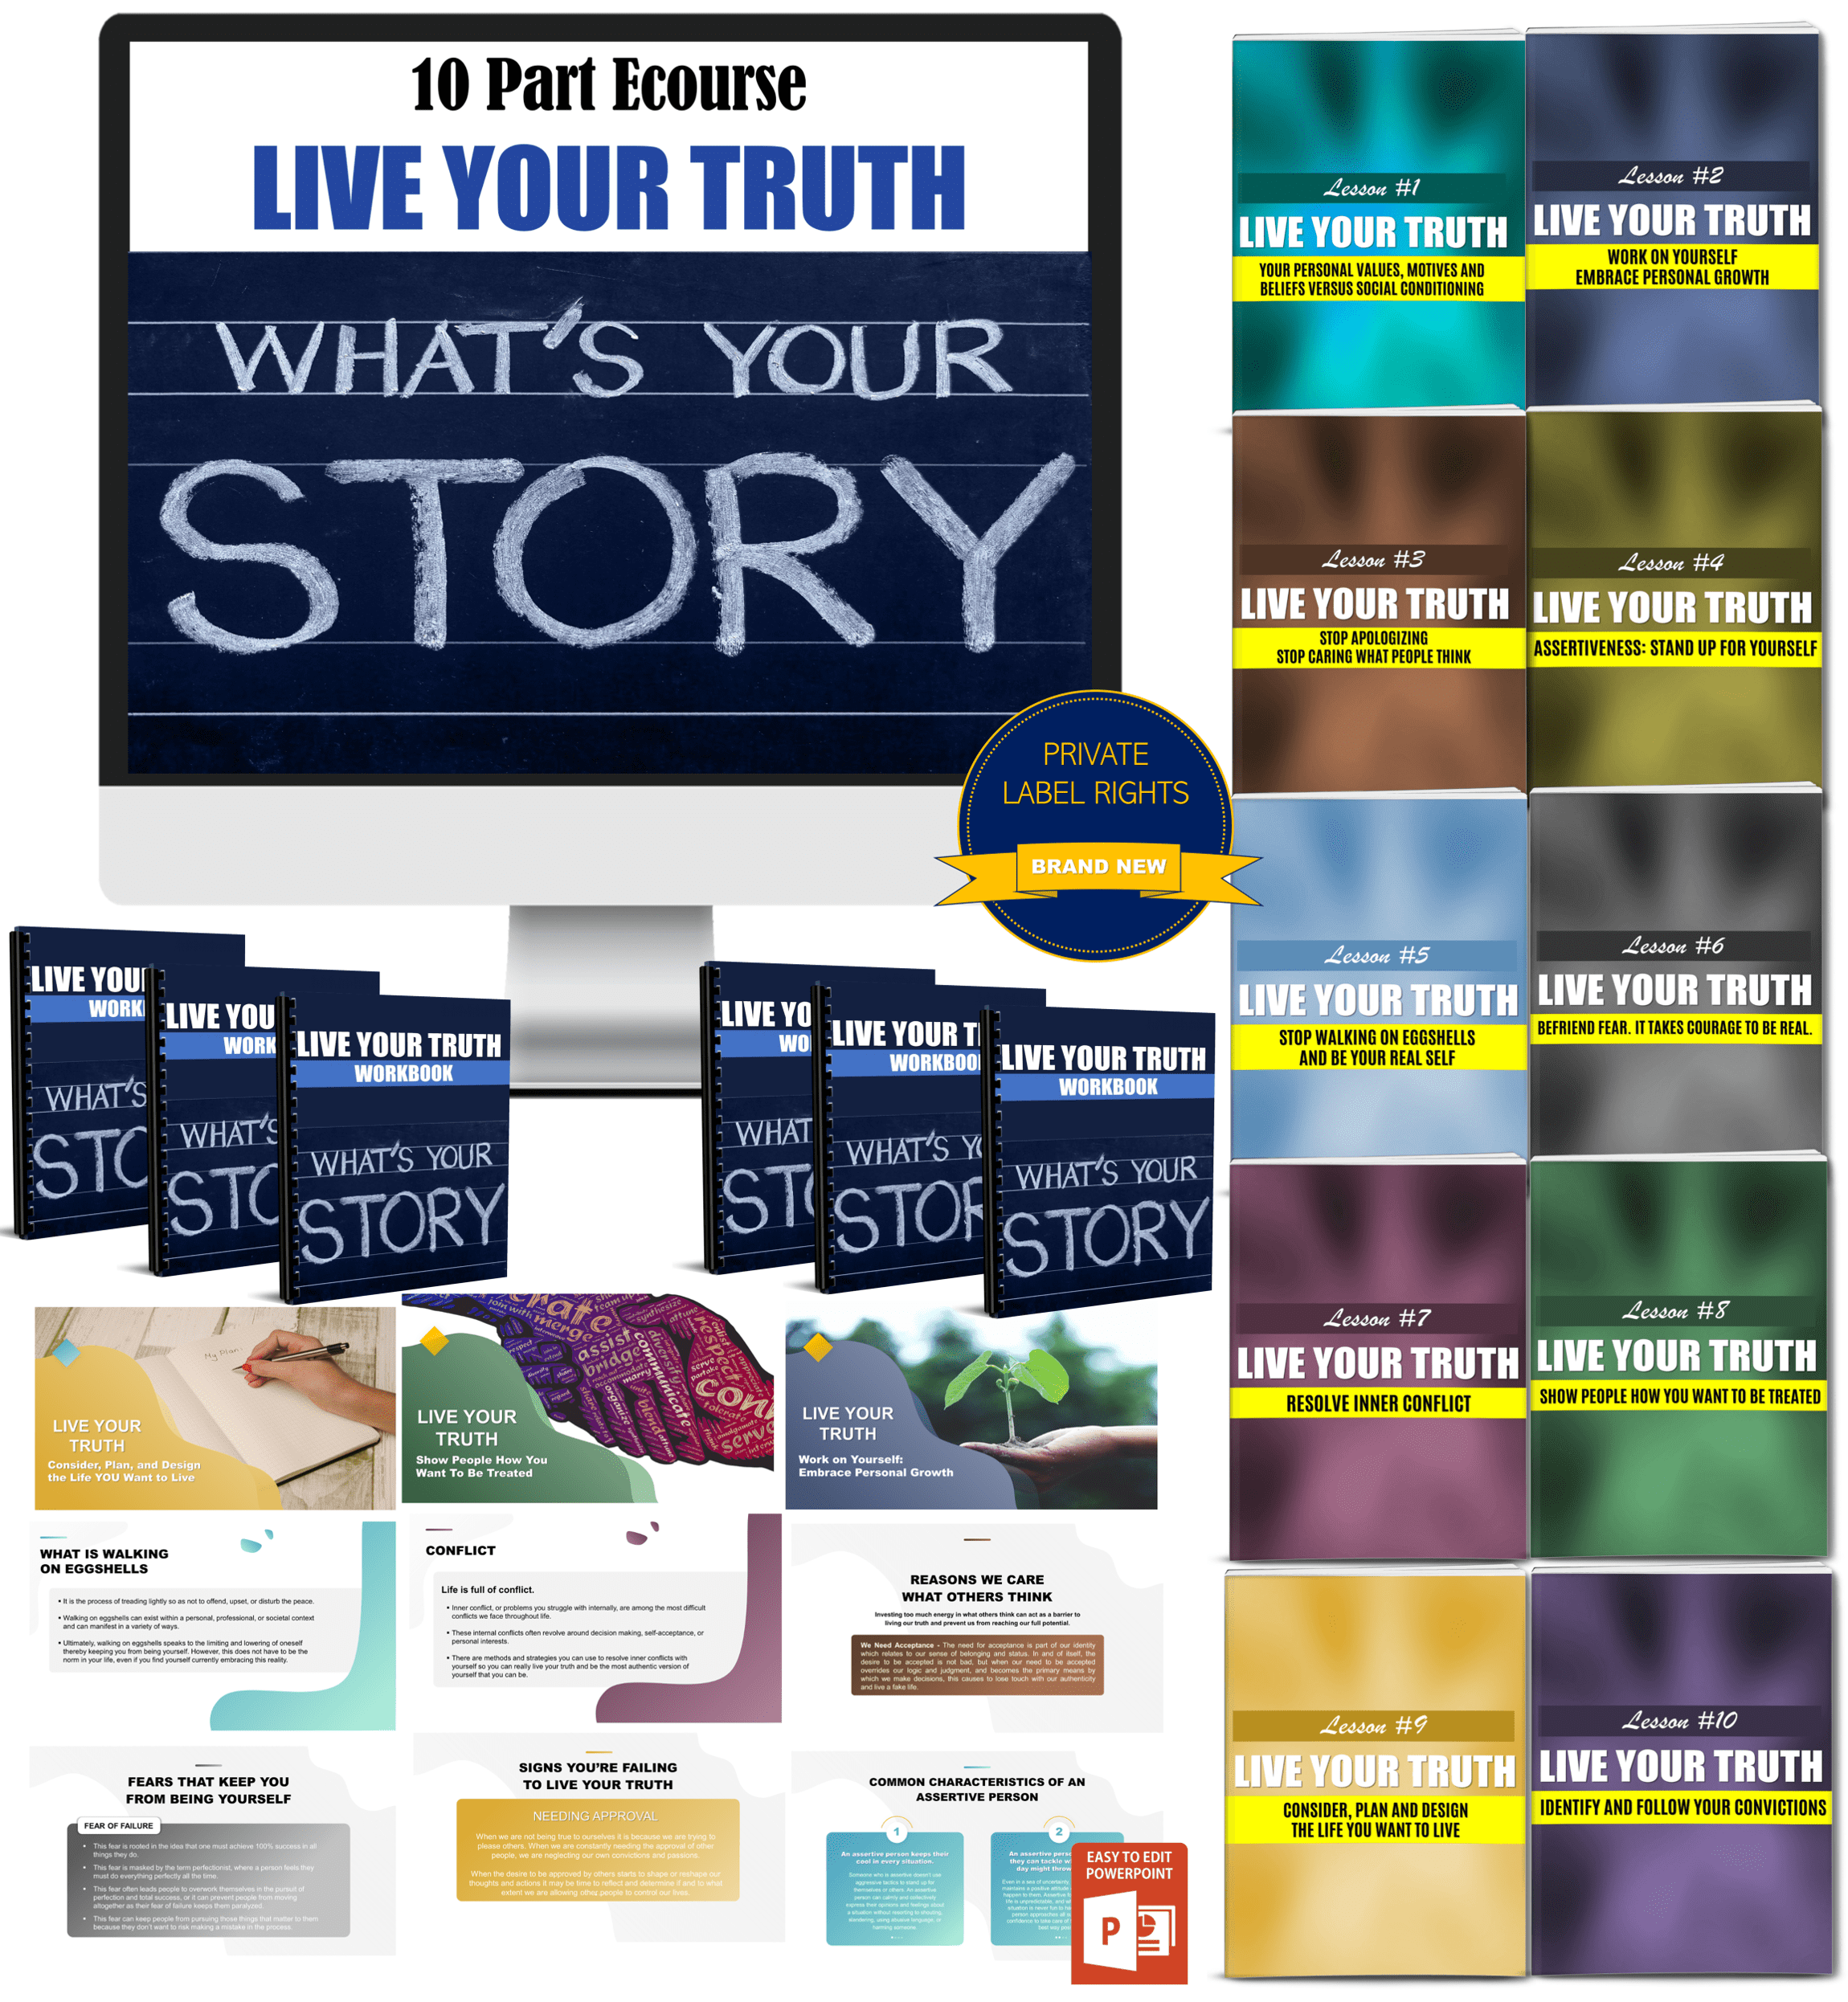 10 Part eCourse Live Your Truth Contett Pack With Private Label Rights